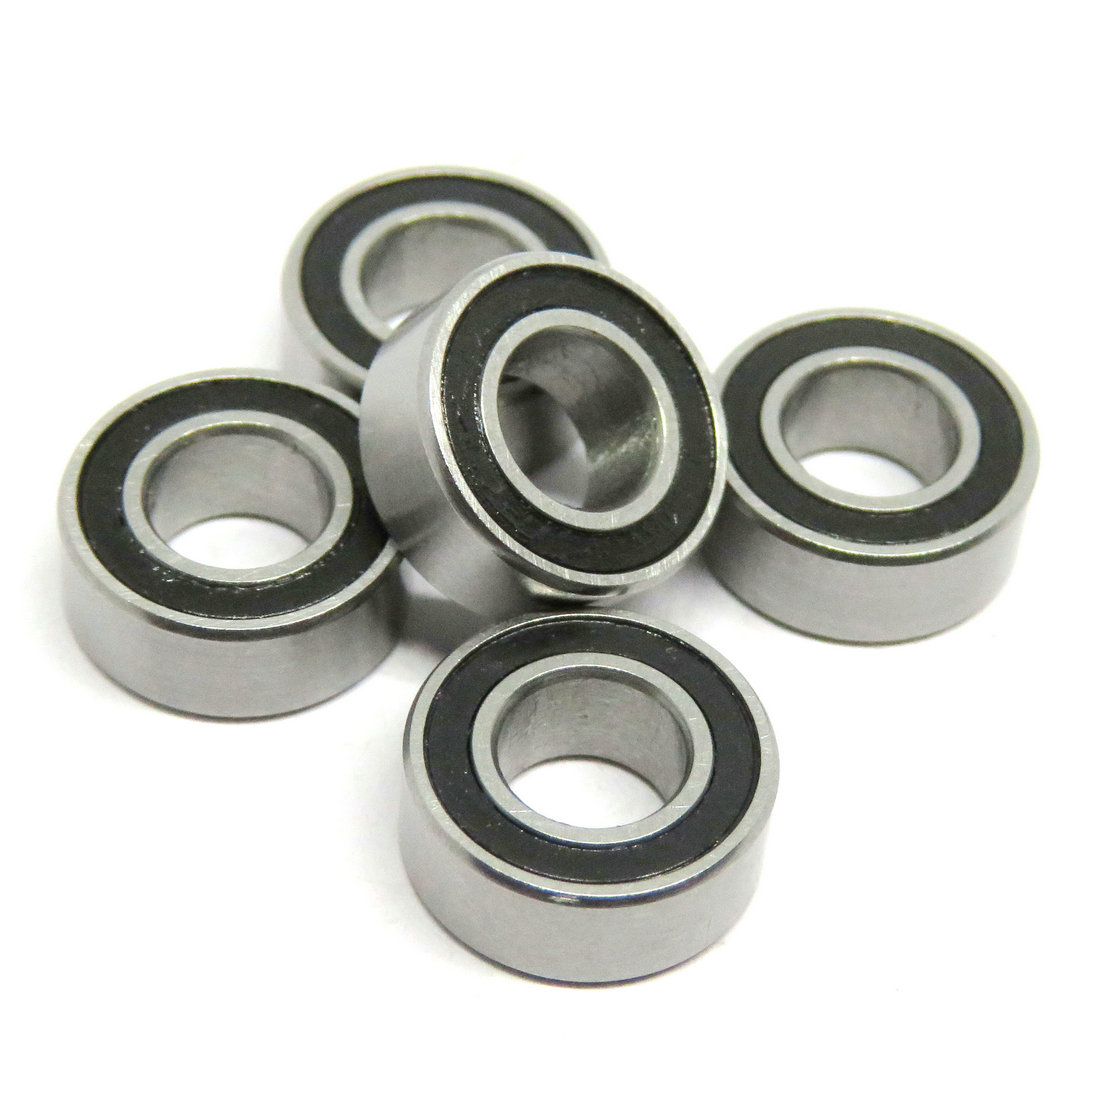 6 mm Round ID MR126RS MR126 RS 6x12x4mm Rubber Shielded Ball Bearing L-1260RS Miniature Bearing.jpg